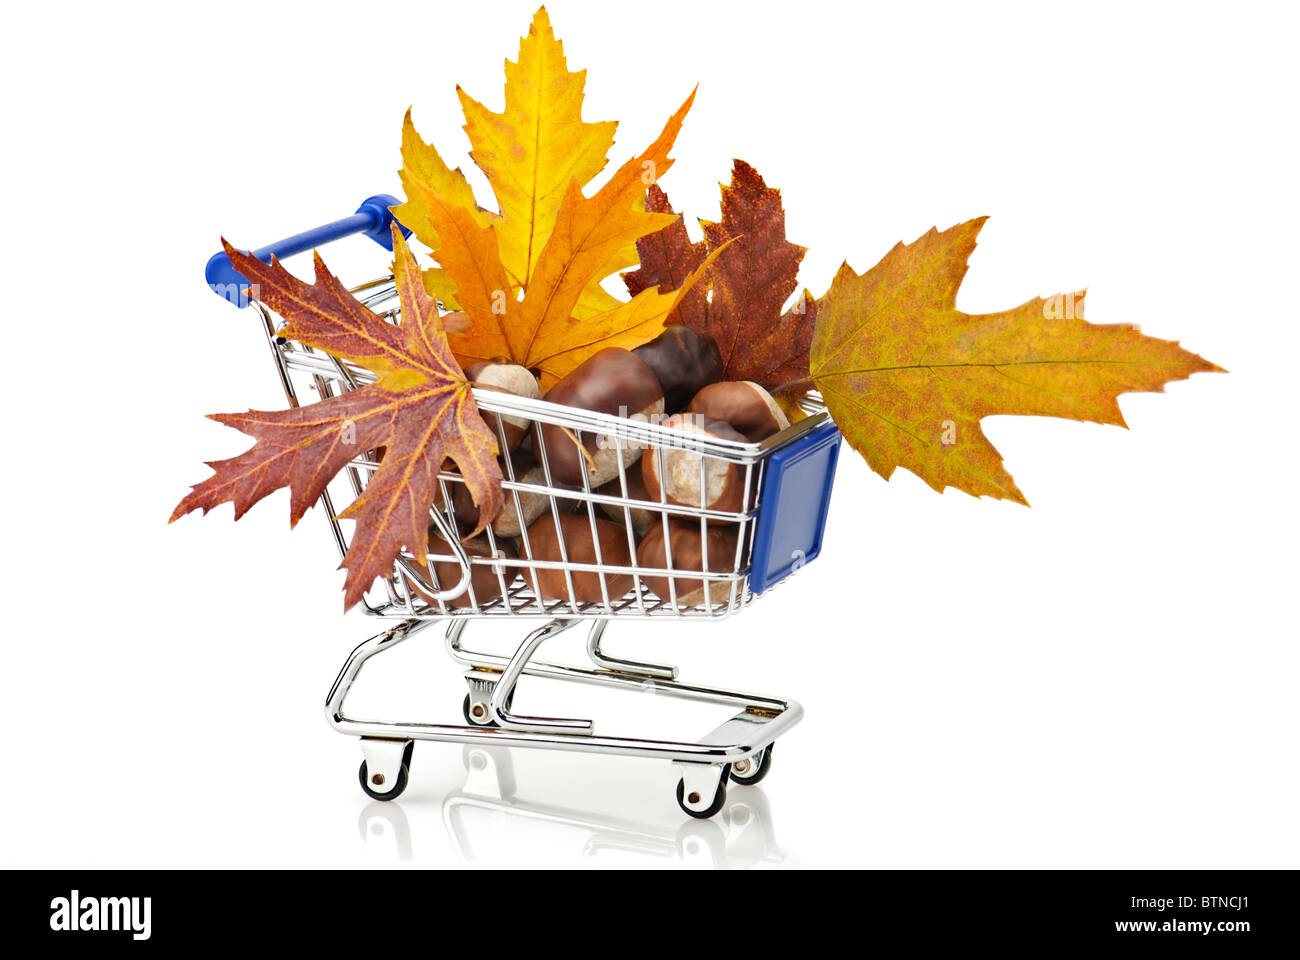 Autumn Shopping: shopping cart full of chestnuts and autumn maple leaves Stock Photo